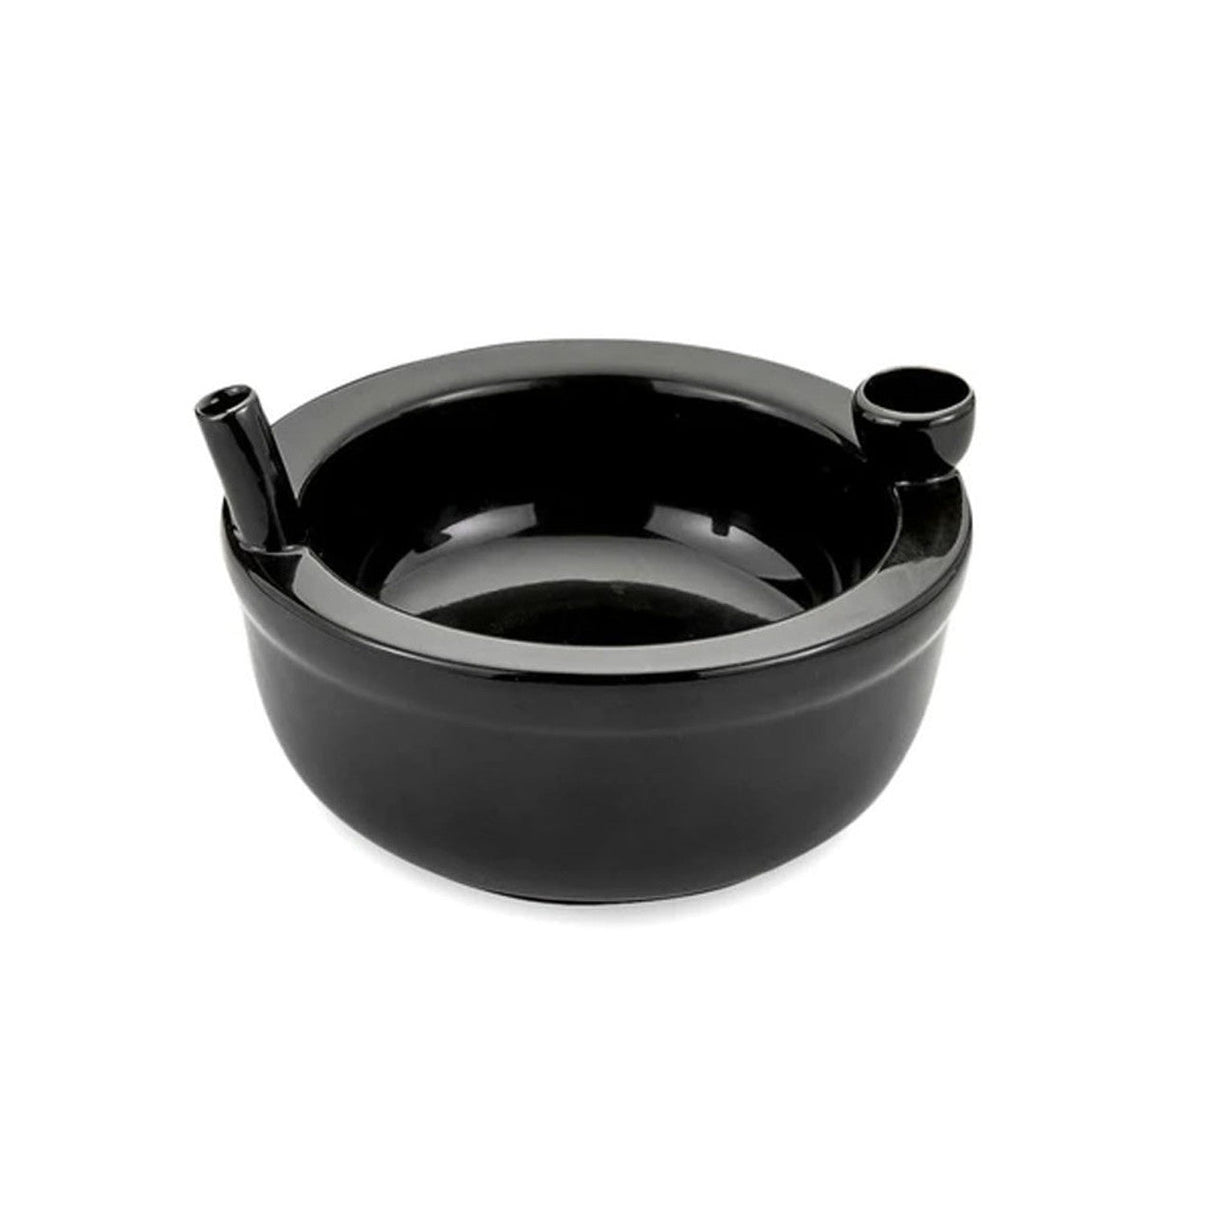 Roast & Toast Cereal Bowl Pipe in Black, Ceramic Novelty Gift for Dry Herbs, Front View